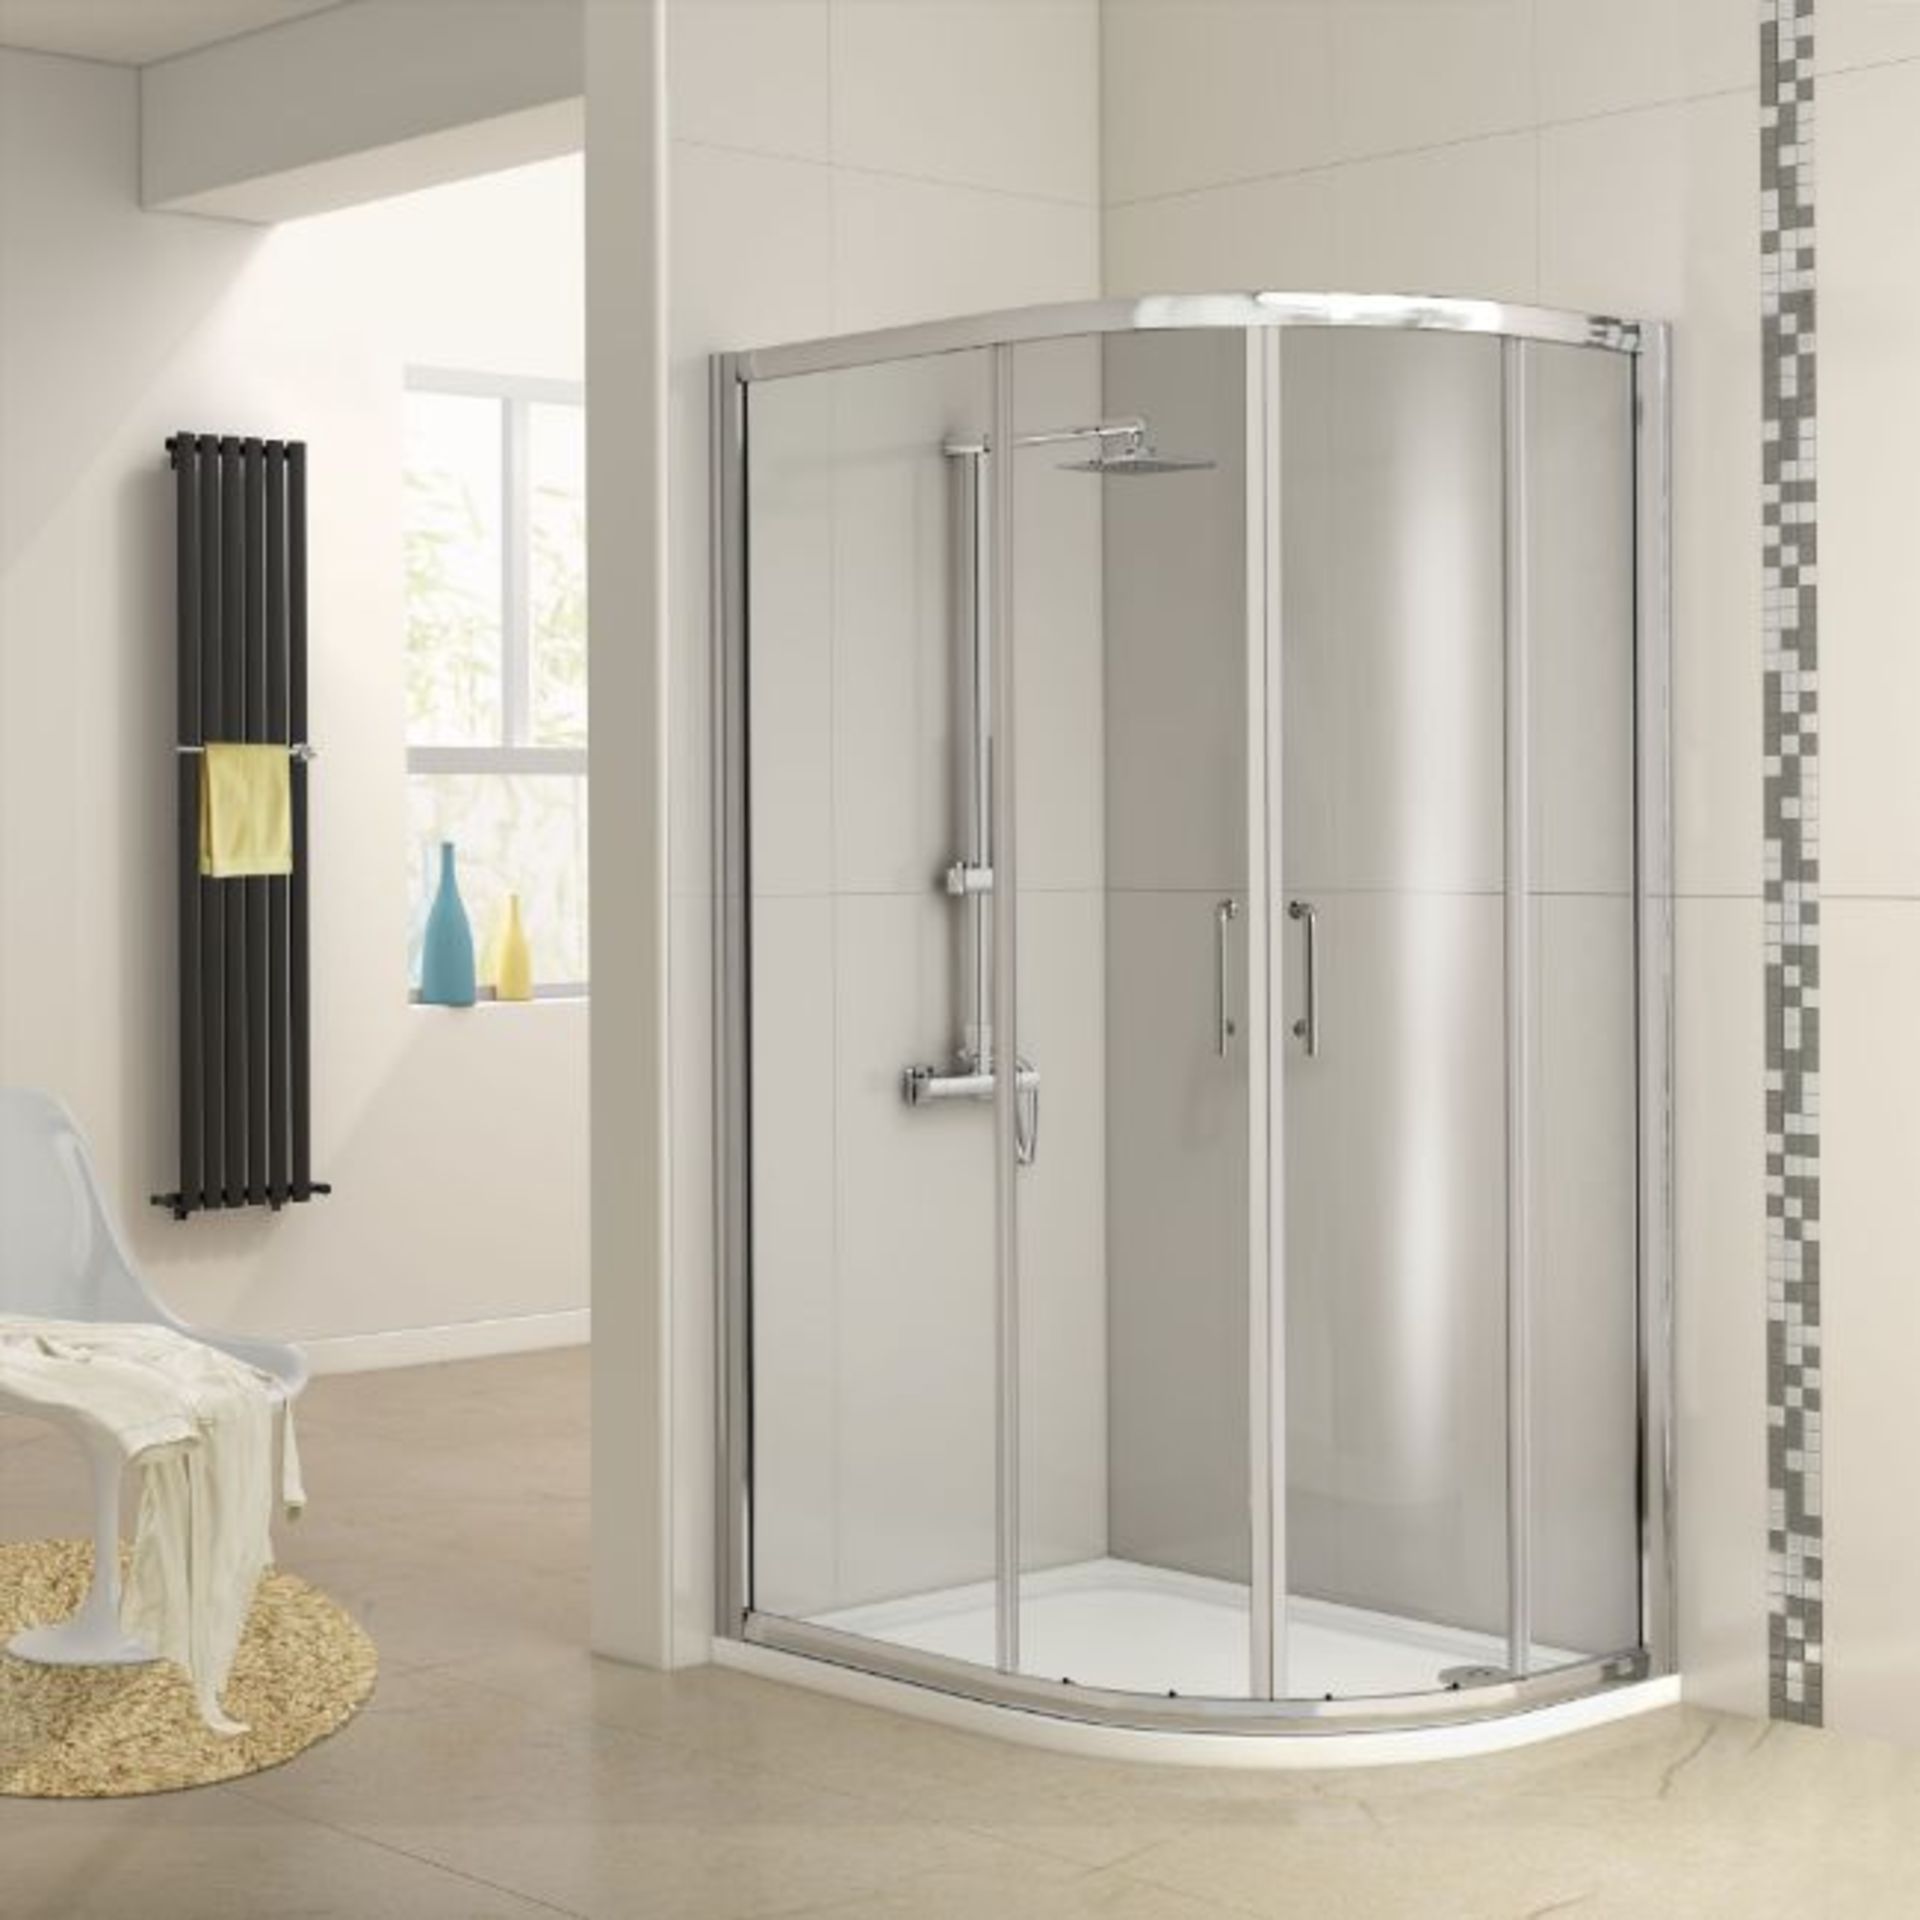 (REF84) 1200x900mm - 6mm - Offset Quadrant Shower Enclosure. RRP £599.99.Make the most of tha... - Image 3 of 4